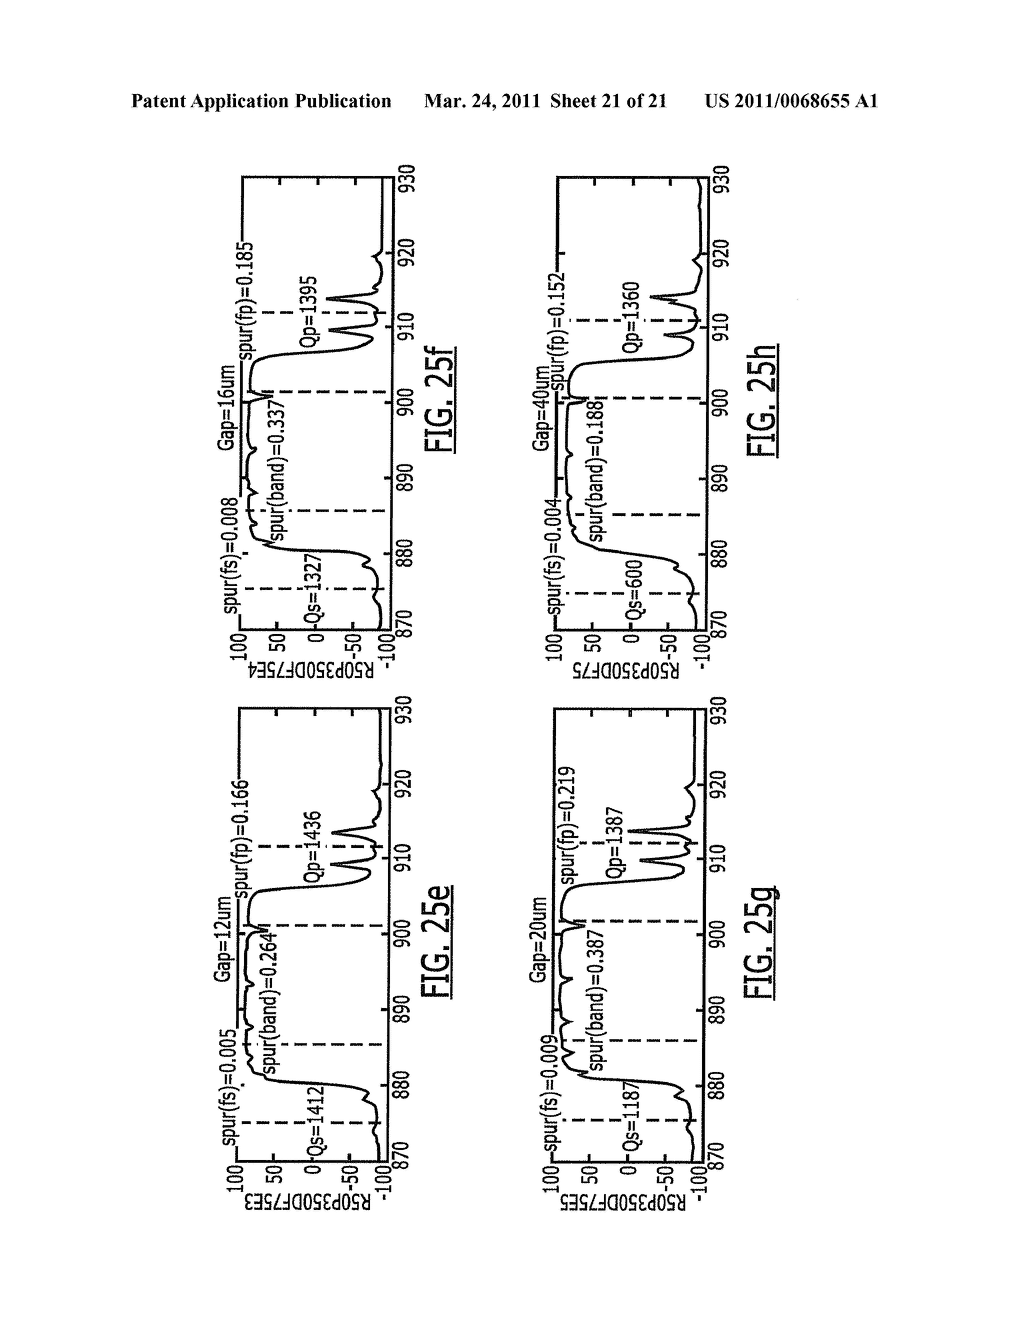 PISTON MODE ACOUSTIC WAVE DEVICE AND METHOD PROVIDING A HIGH COUPLING FACTOR - diagram, schematic, and image 22